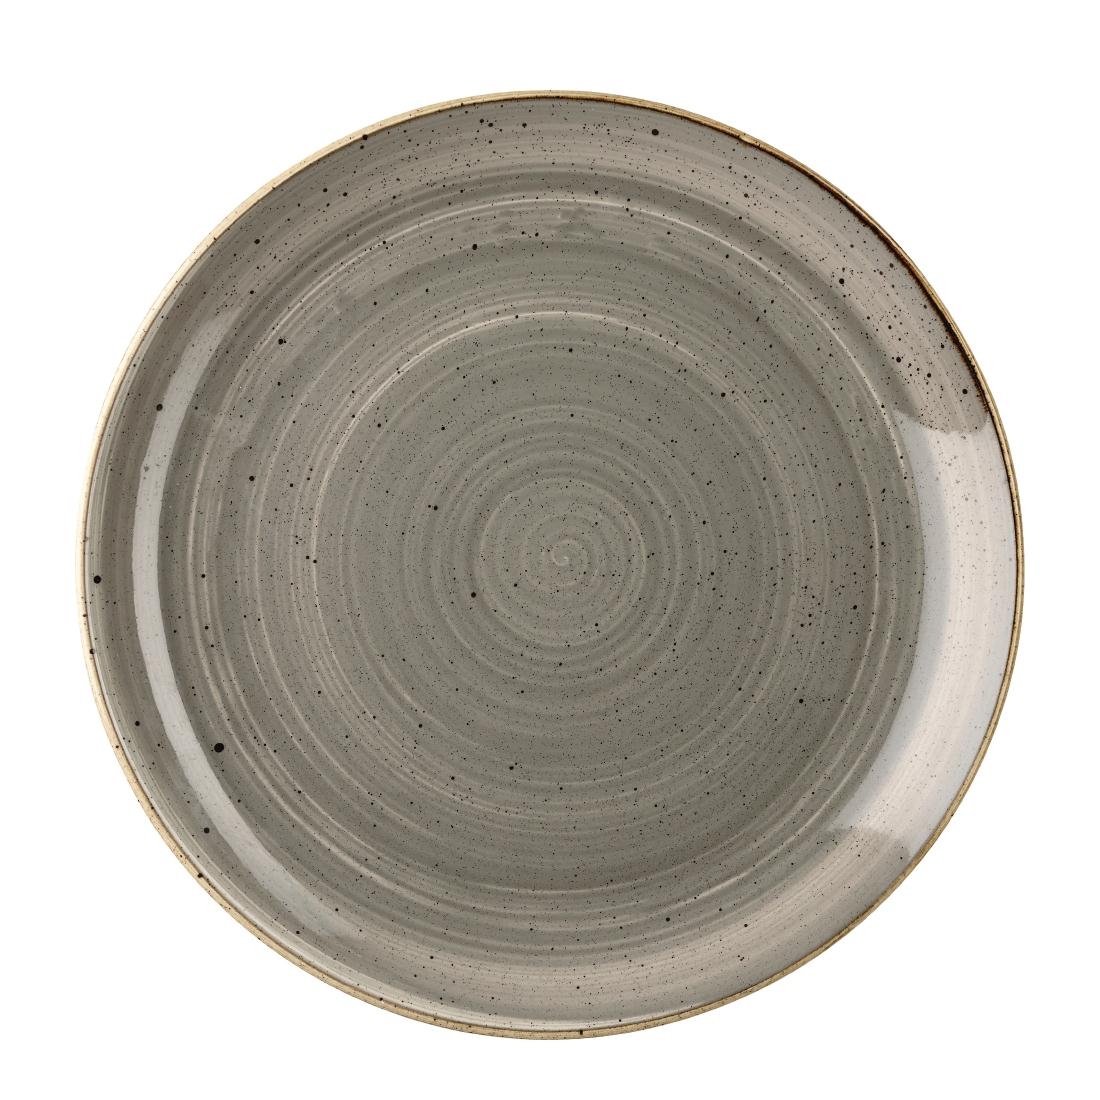 Churchill Stonecast Round Coupe Plate Peppercorn Grey 260mm